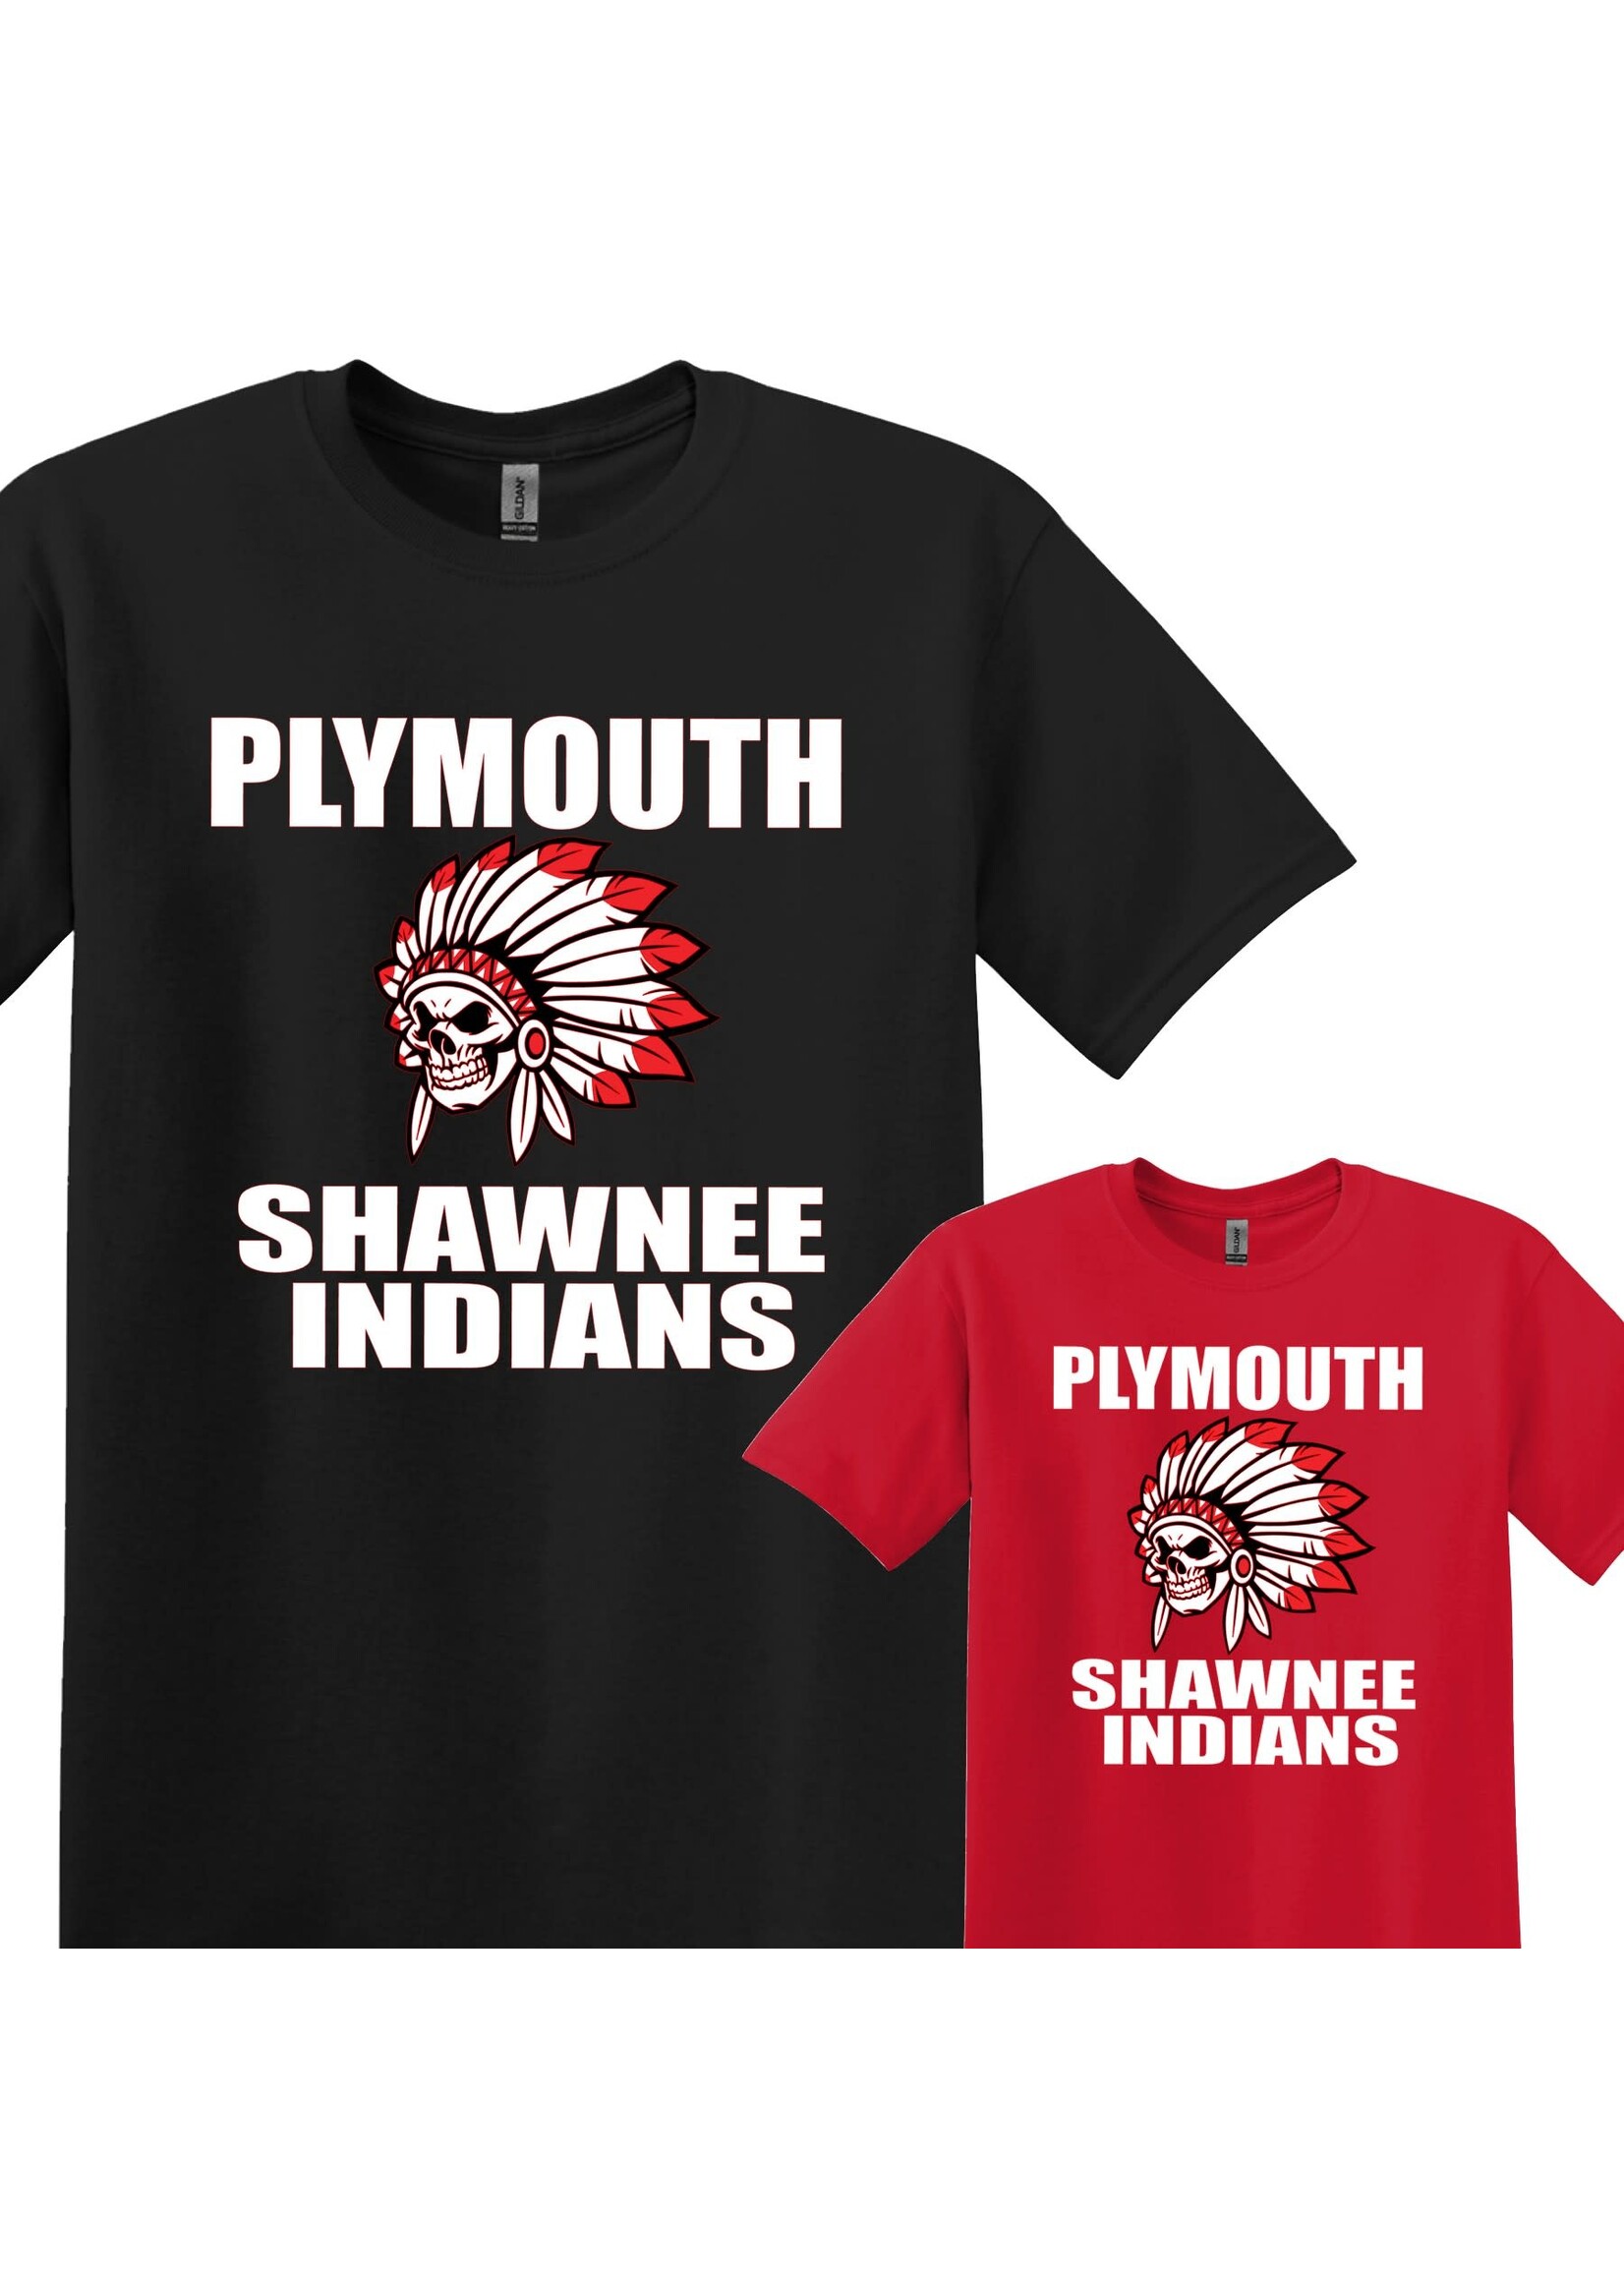 Plymouth Shawnee Indians Graphic T-Shirt